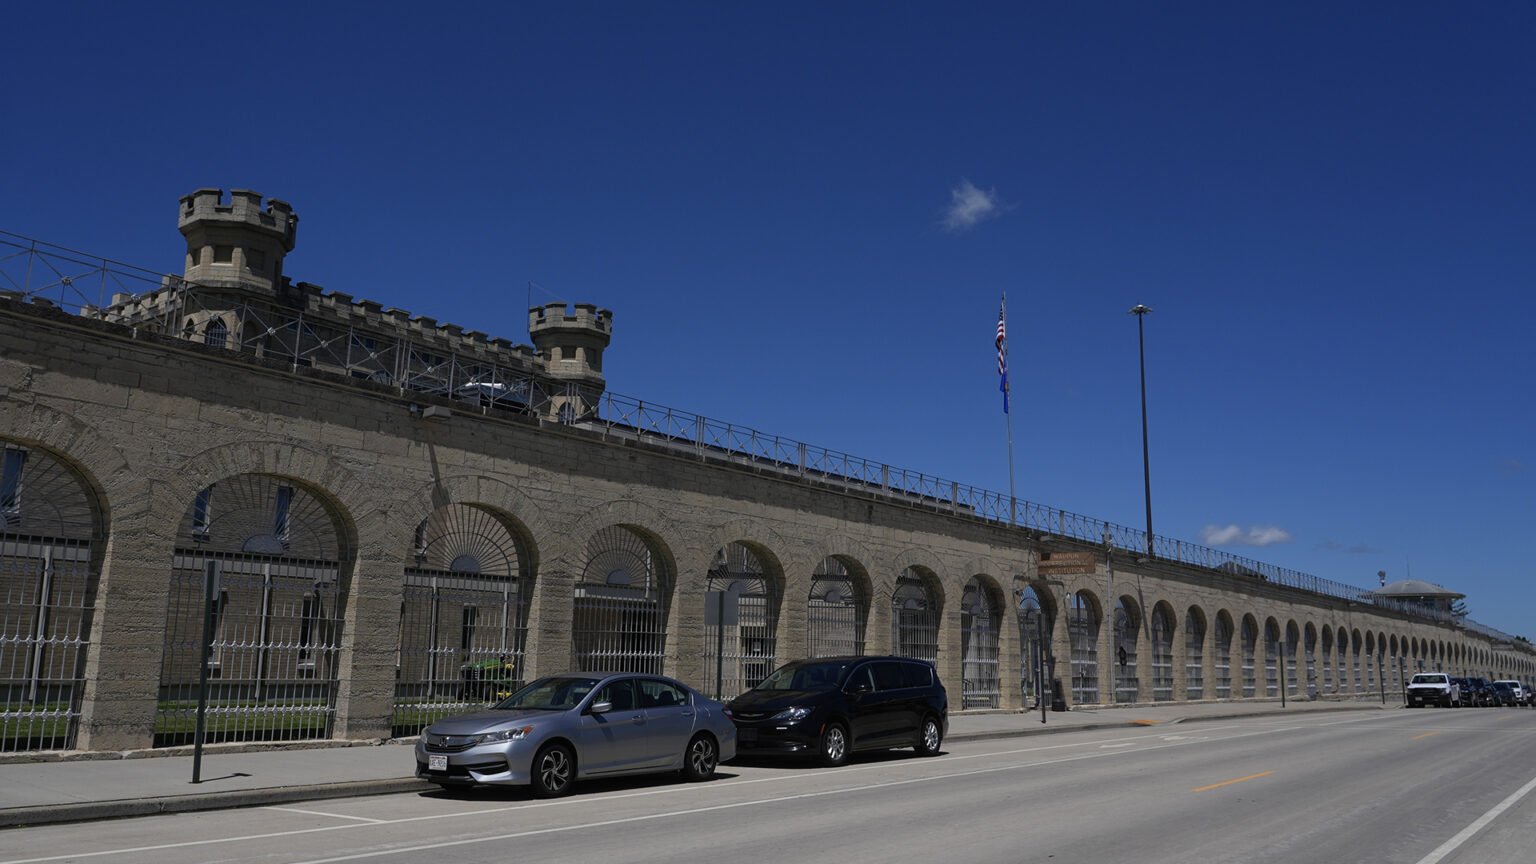 Multiple cars are parked in roadside parking spaces next to a masonry wall with numerous arches enclosed with a metal fence, which stands in front of a masonry structure topped by crenelated towers to one side and a tower with a peaked roof in the distance, along with a flagpole with the U.S. and Wisconsin flags and a tall light pole.